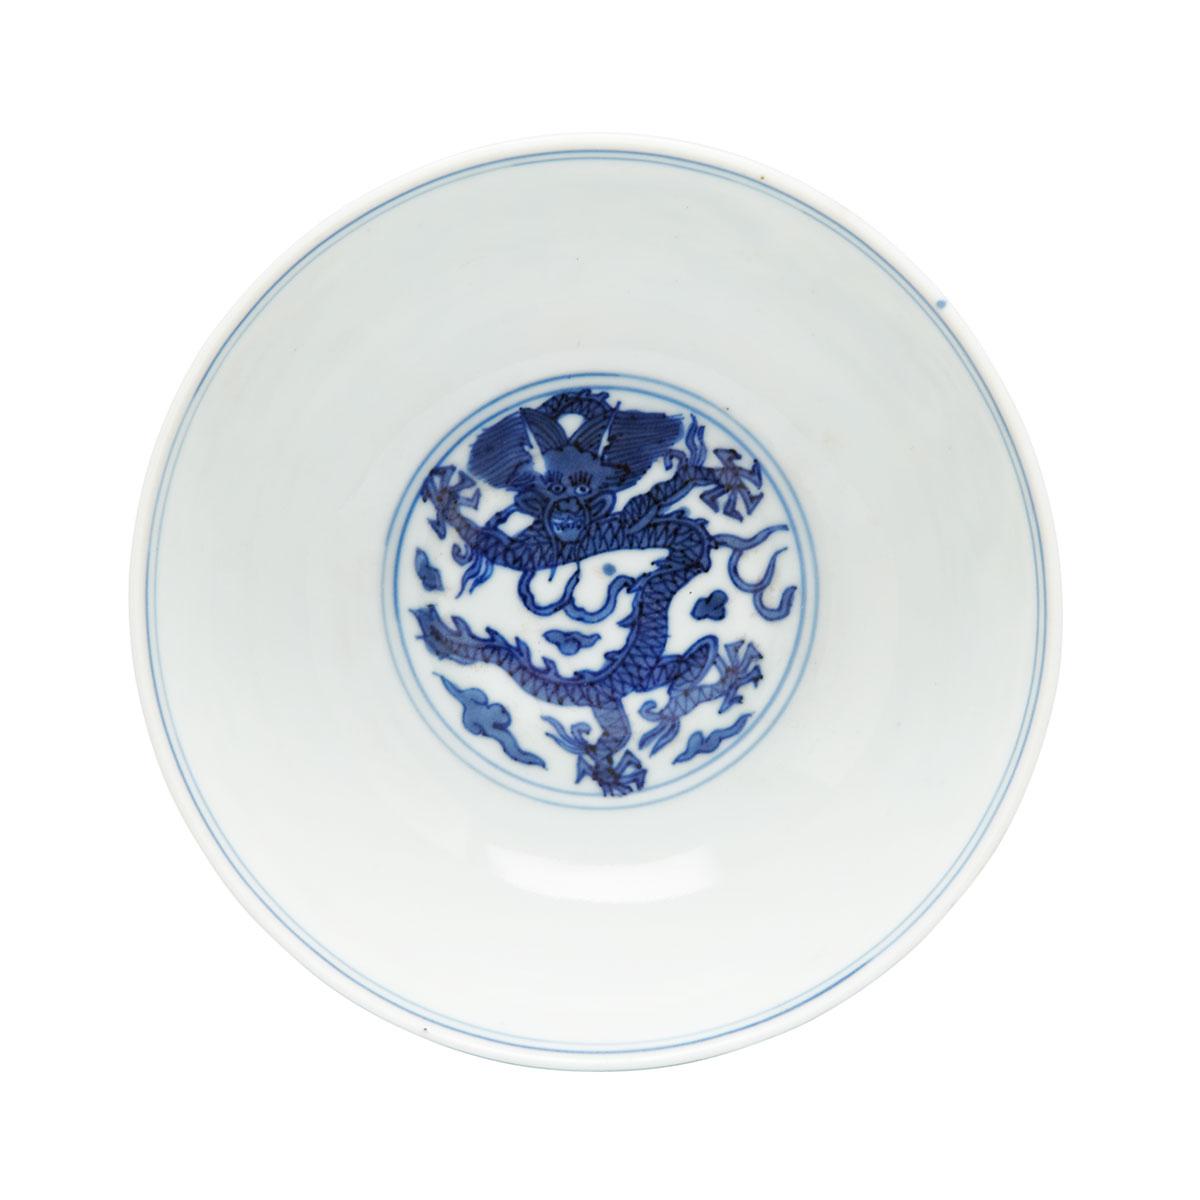 Blue and White Dragon Dish, Wanli Mark and Period (1573-1619)